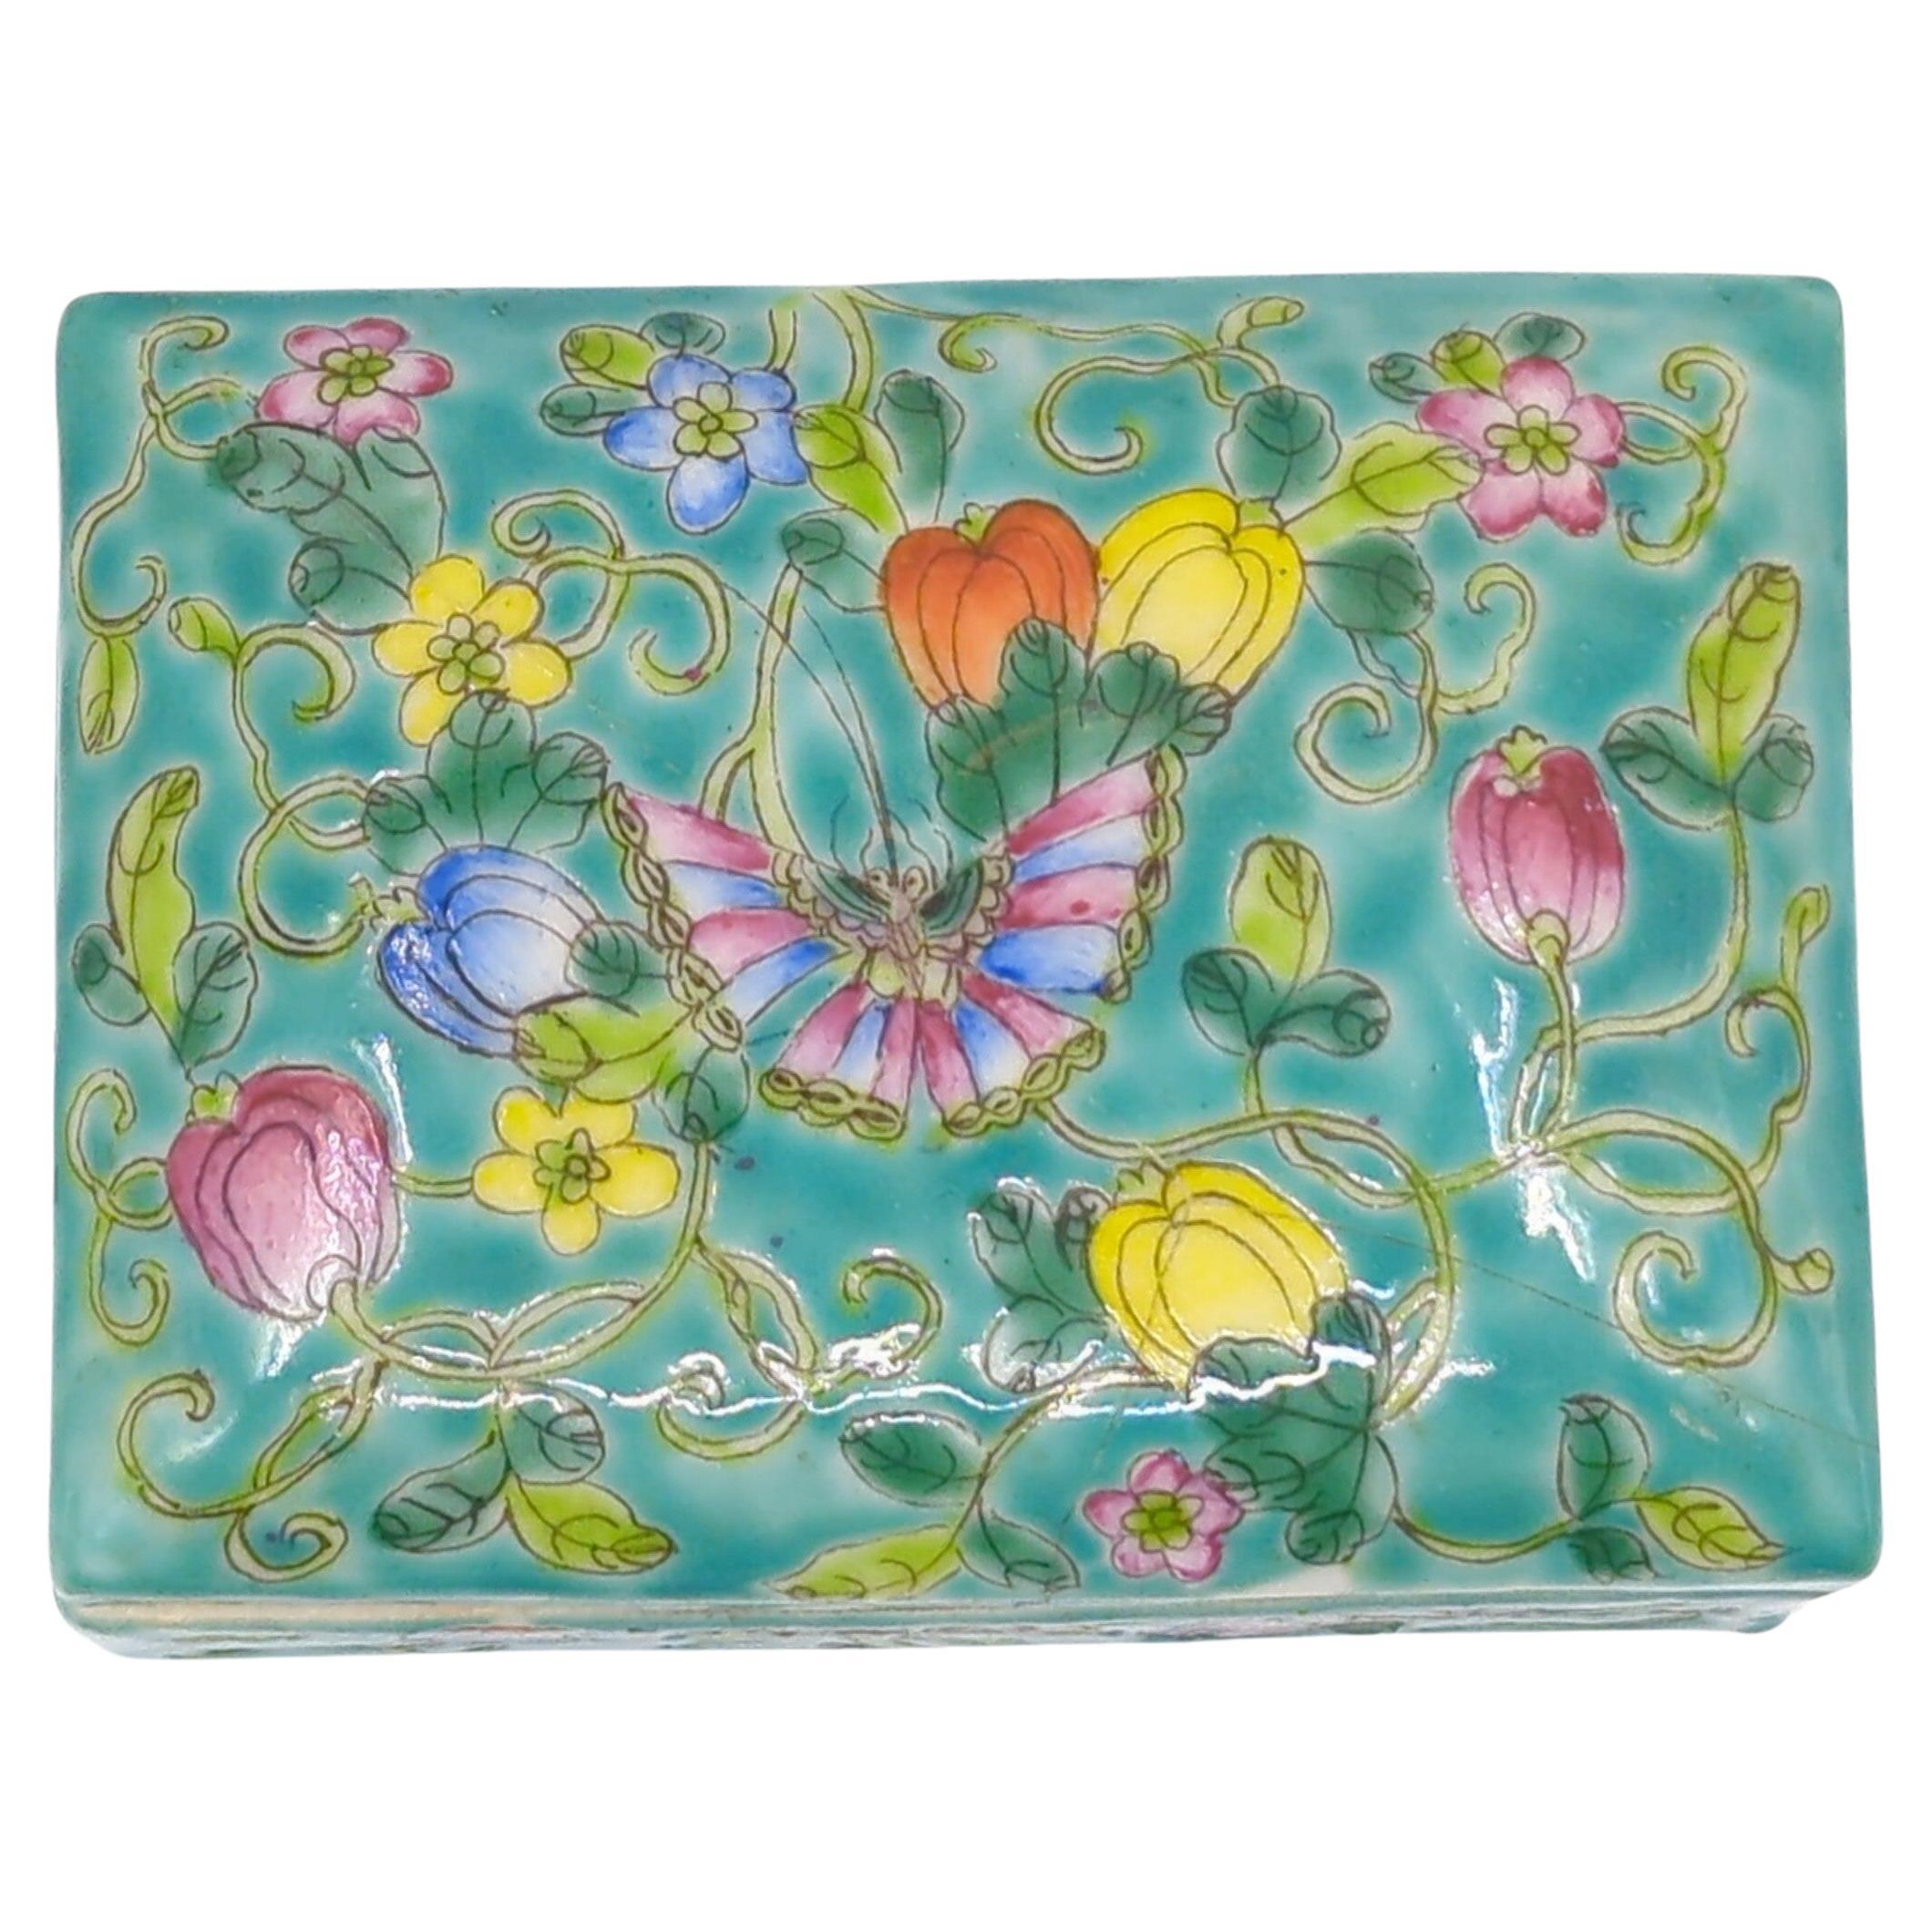 A wonderful antique Chinese famille rose fencai porcelain covered jewelry box, finely decorated with lively butterflies in colorful blossoms, scrolling vines and foliage, on turquoise ground. Bottom marked 